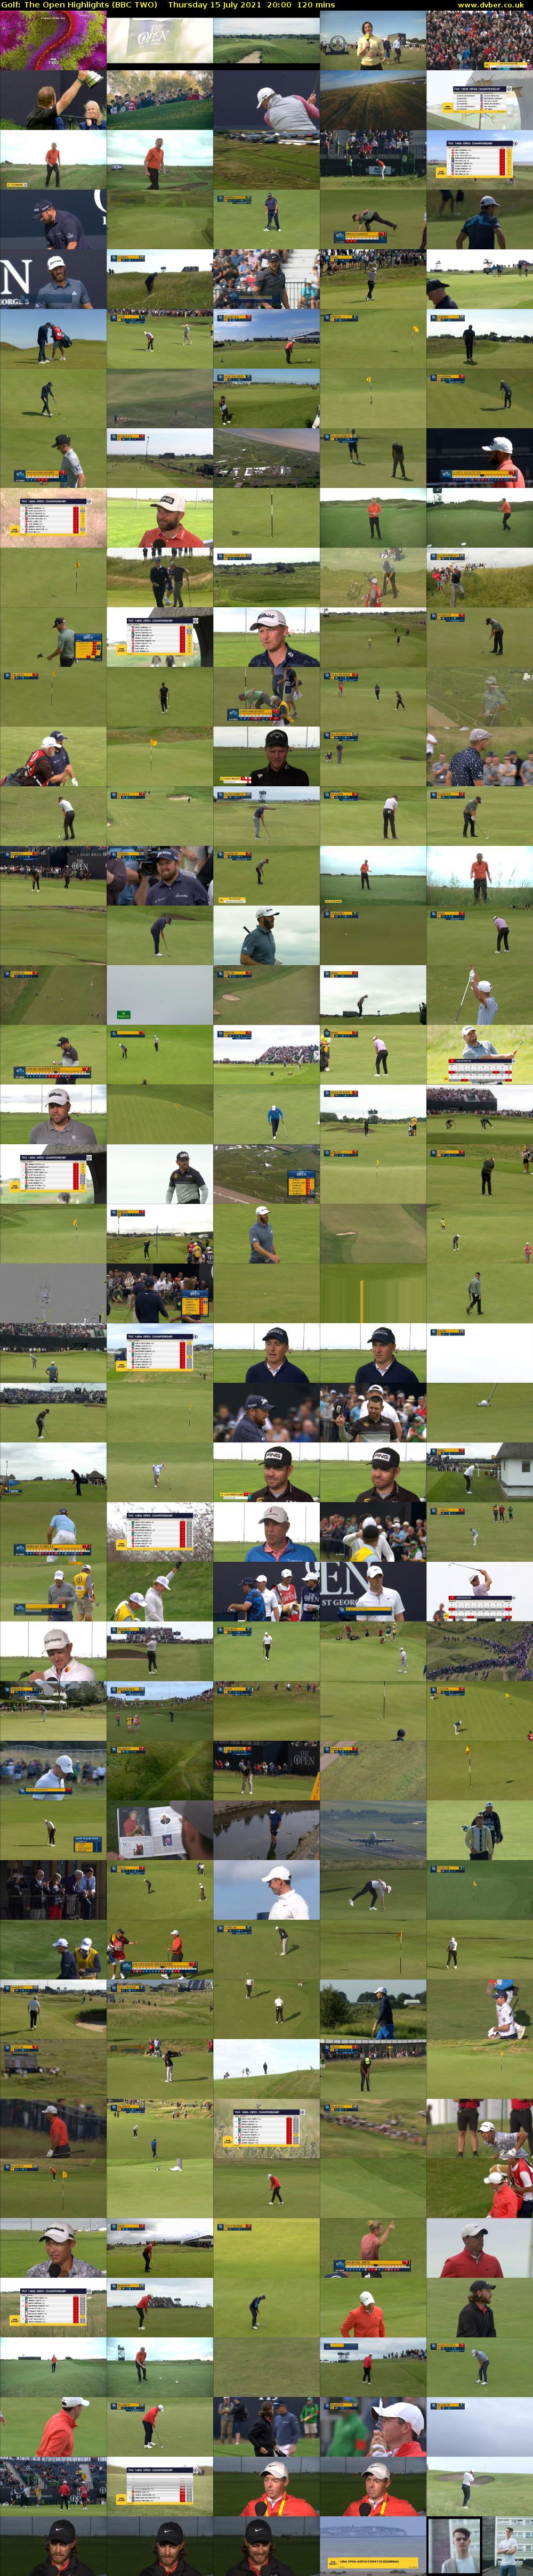 Golf: The Open Highlights (BBC TWO) Thursday 15 July 2021 20:00 - 22:00